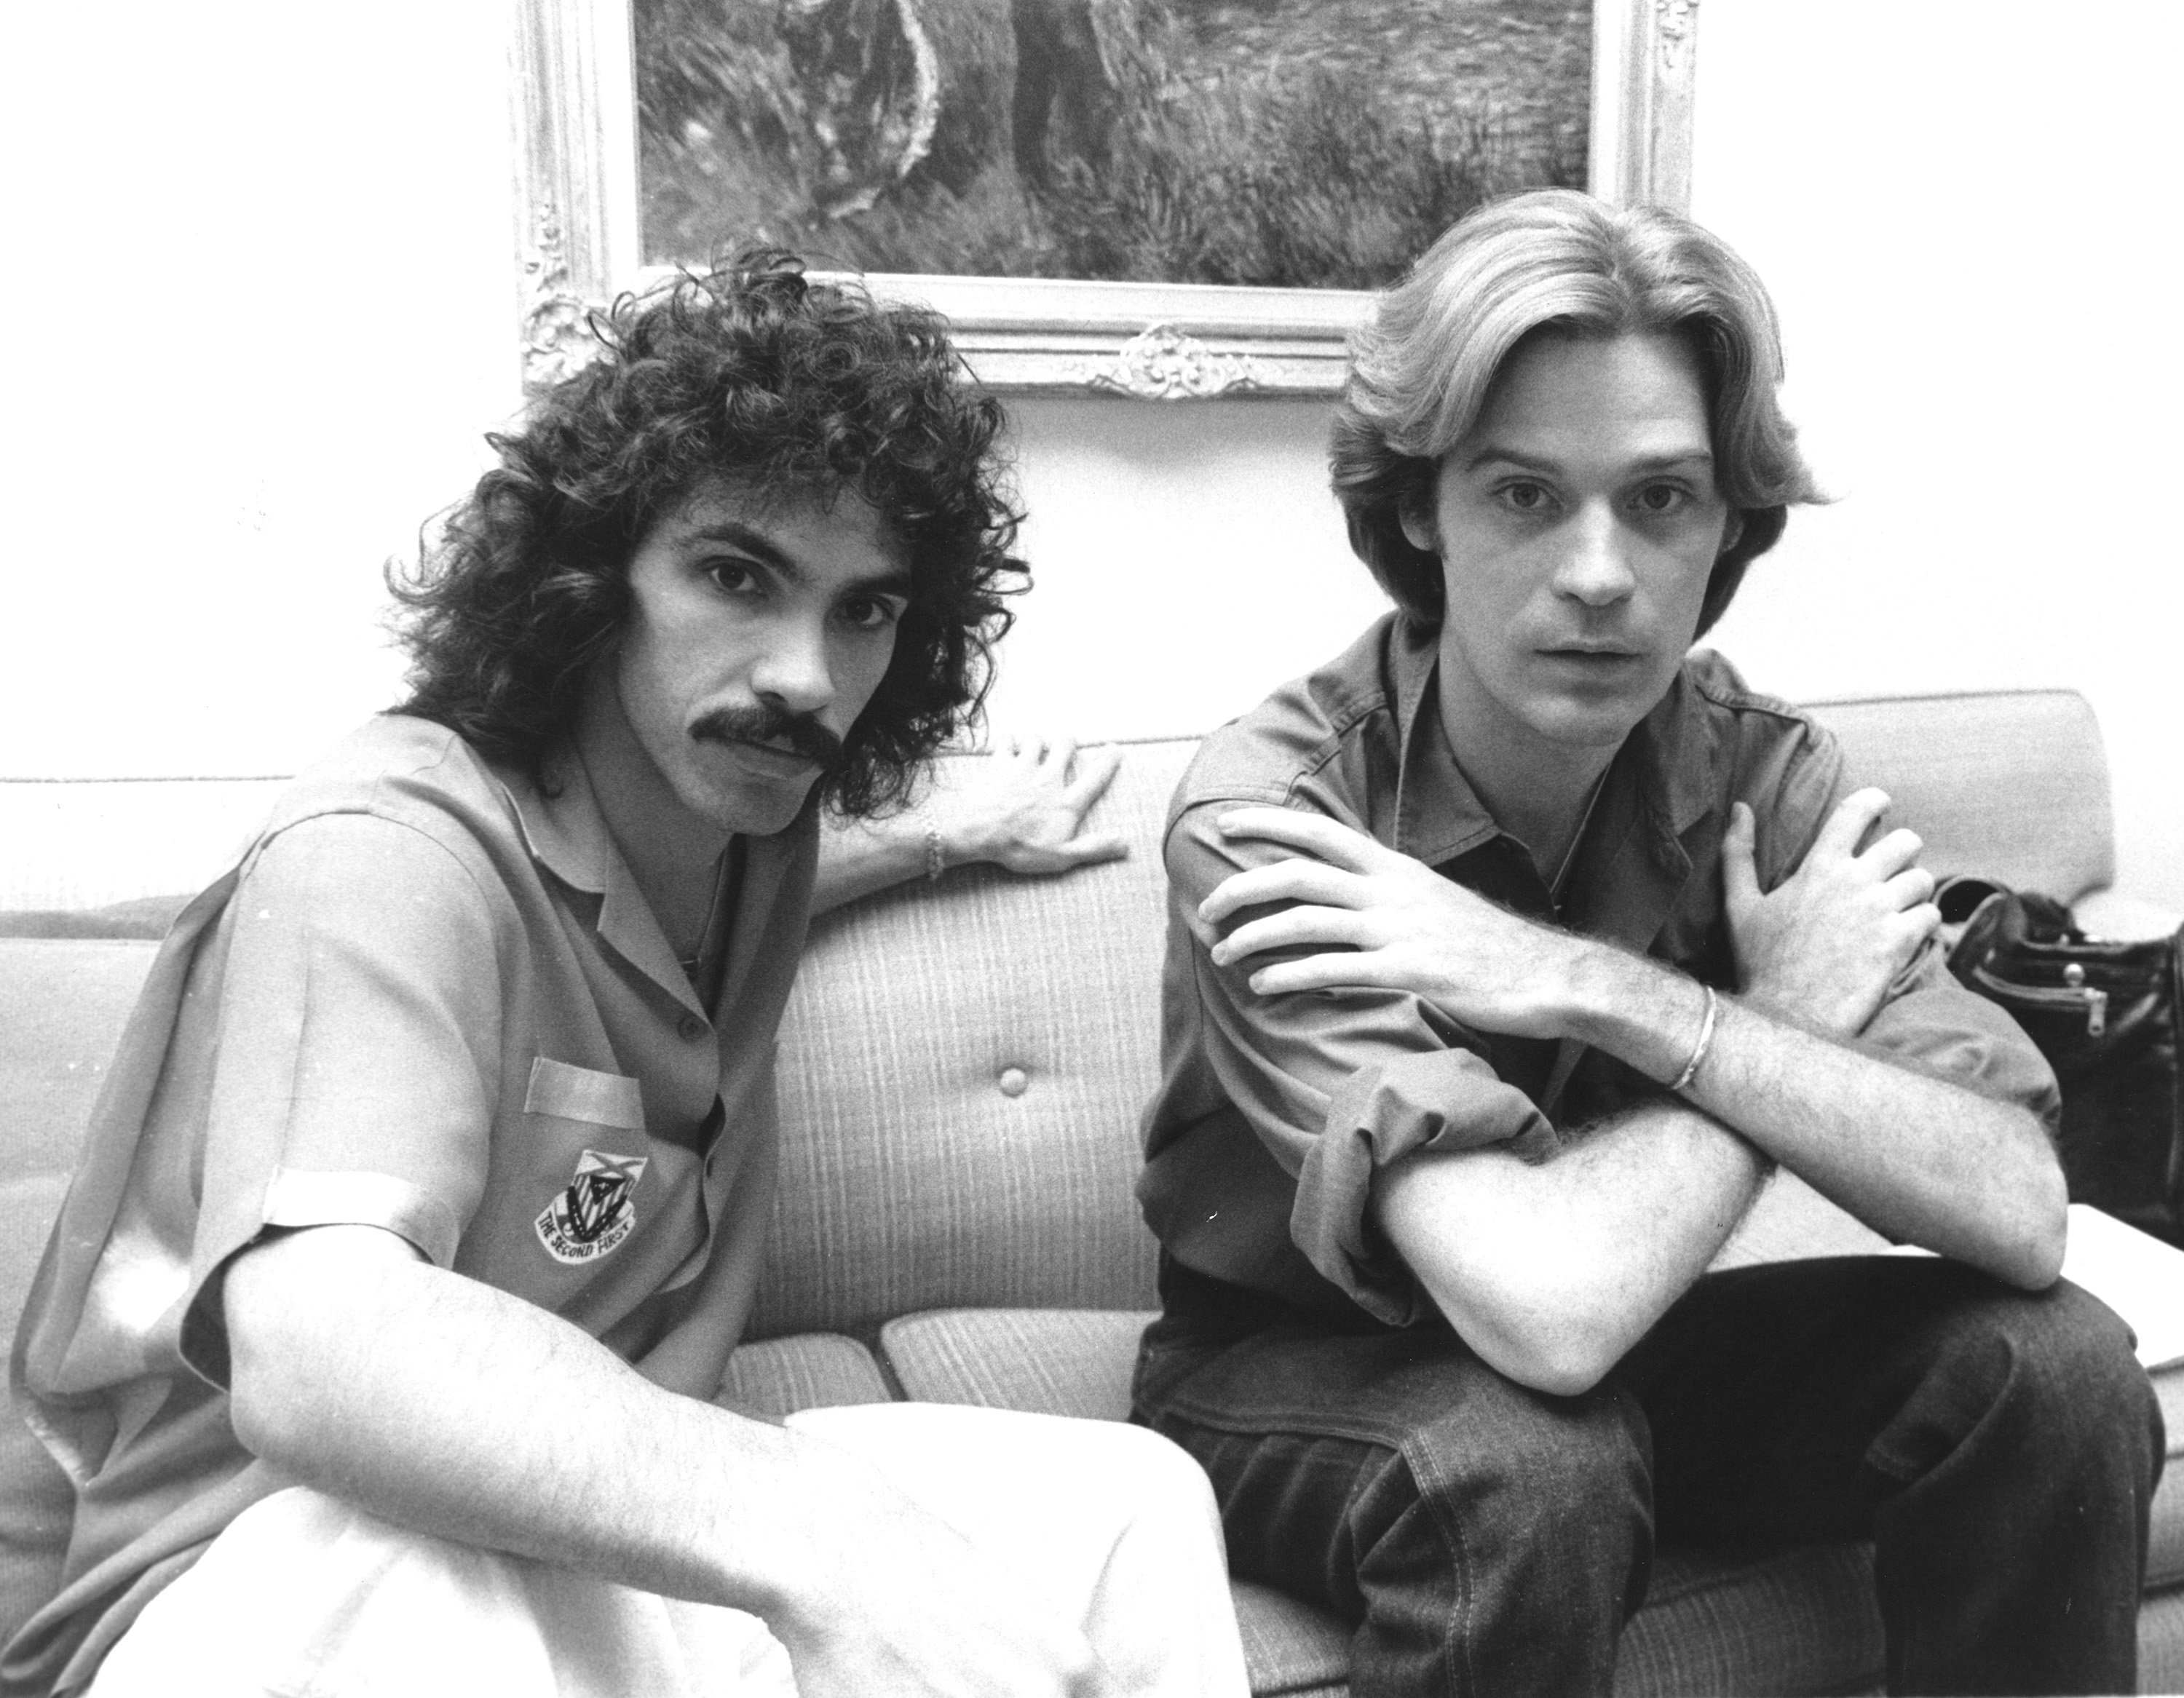 Hall & Oates on a couch